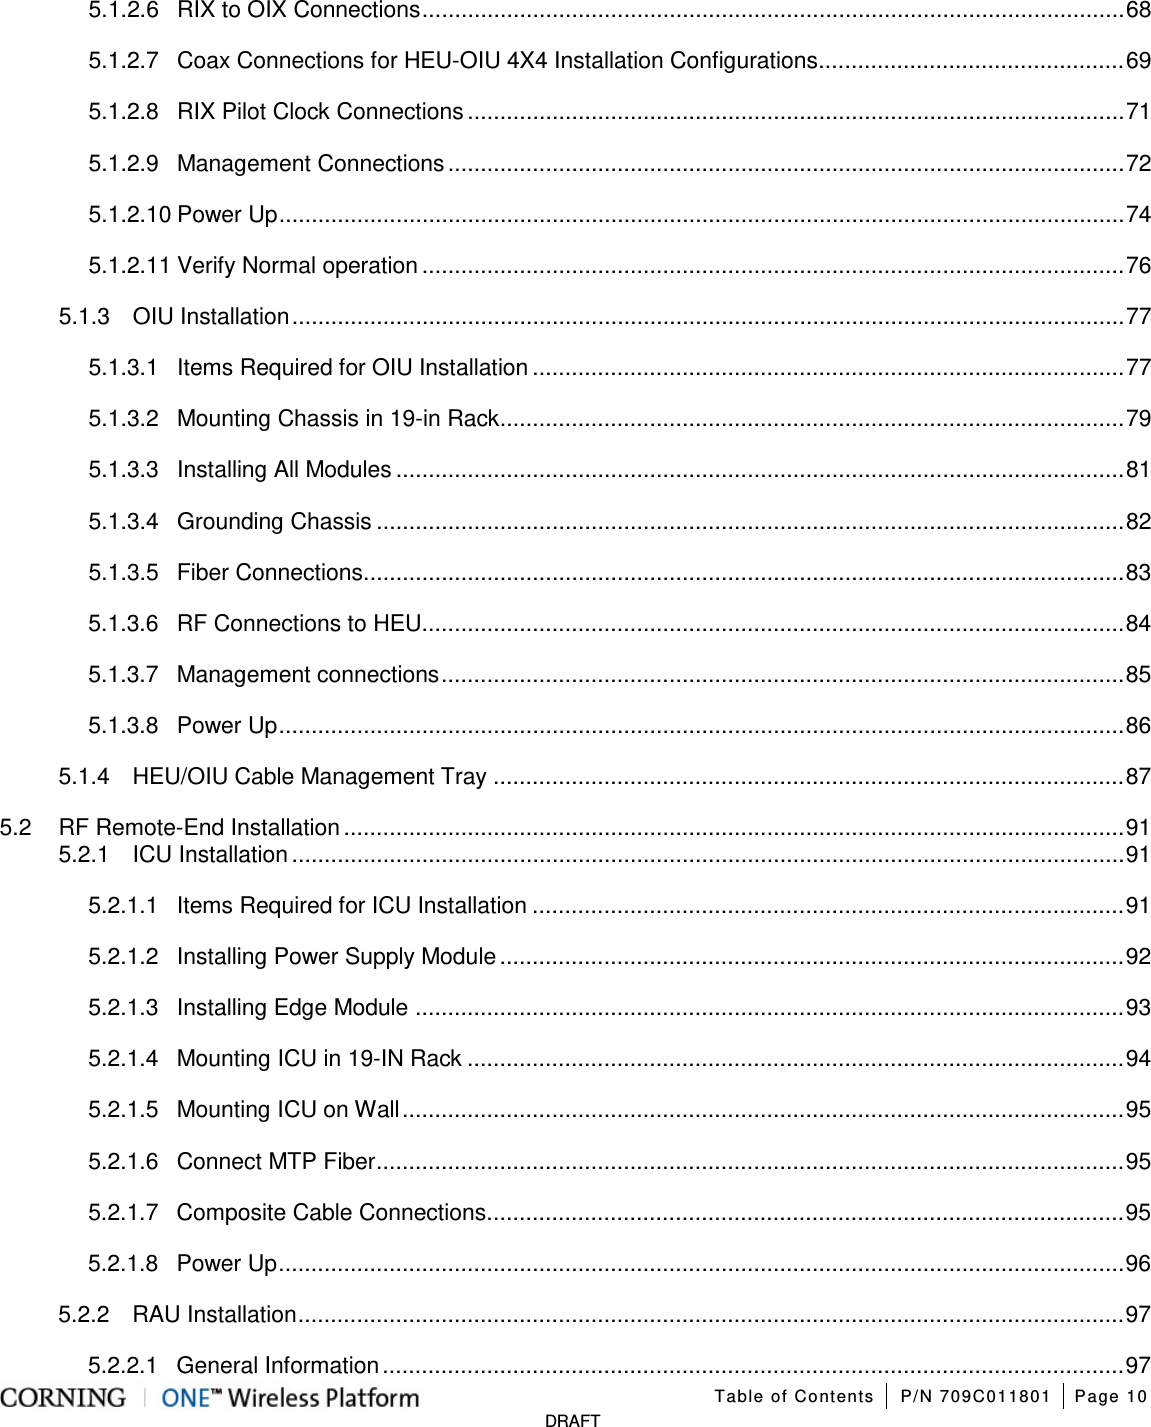   Table of Contents P/N 709C011801 Page 10   DRAFT 5.1.2.6 RIX to OIX Connections ............................................................................................................ 68 5.1.2.7 Coax Connections for HEU-OIU 4X4 Installation Configurations ............................................... 69 5.1.2.8 RIX Pilot Clock Connections ..................................................................................................... 71 5.1.2.9 Management Connections ........................................................................................................ 72 5.1.2.10 Power Up .................................................................................................................................. 74 5.1.2.11 Verify Normal operation ............................................................................................................ 76 5.1.3 OIU Installation ................................................................................................................................ 77 5.1.3.1 Items Required for OIU Installation ........................................................................................... 77 5.1.3.2 Mounting Chassis in 19-in Rack ................................................................................................ 79 5.1.3.3 Installing All Modules ................................................................................................................ 81 5.1.3.4 Grounding Chassis ................................................................................................................... 82 5.1.3.5 Fiber Connections ..................................................................................................................... 83 5.1.3.6 RF Connections to HEU ............................................................................................................ 84 5.1.3.7 Management connections ......................................................................................................... 85 5.1.3.8 Power Up .................................................................................................................................. 86 5.1.4 HEU/OIU Cable Management Tray ................................................................................................. 87 5.2 RF Remote-End Installation ........................................................................................................................ 91 5.2.1 ICU Installation ................................................................................................................................ 91 5.2.1.1 Items Required for ICU Installation ........................................................................................... 91 5.2.1.2 Installing Power Supply Module ................................................................................................ 92 5.2.1.3 Installing Edge Module ............................................................................................................. 93 5.2.1.4 Mounting ICU in 19-IN Rack ..................................................................................................... 94 5.2.1.5 Mounting ICU on Wall ............................................................................................................... 95 5.2.1.6 Connect MTP Fiber ................................................................................................................... 95 5.2.1.7 Composite Cable Connections .................................................................................................. 95 5.2.1.8 Power Up .................................................................................................................................. 96 5.2.2 RAU Installation ............................................................................................................................... 97 5.2.2.1 General Information .................................................................................................................. 97 